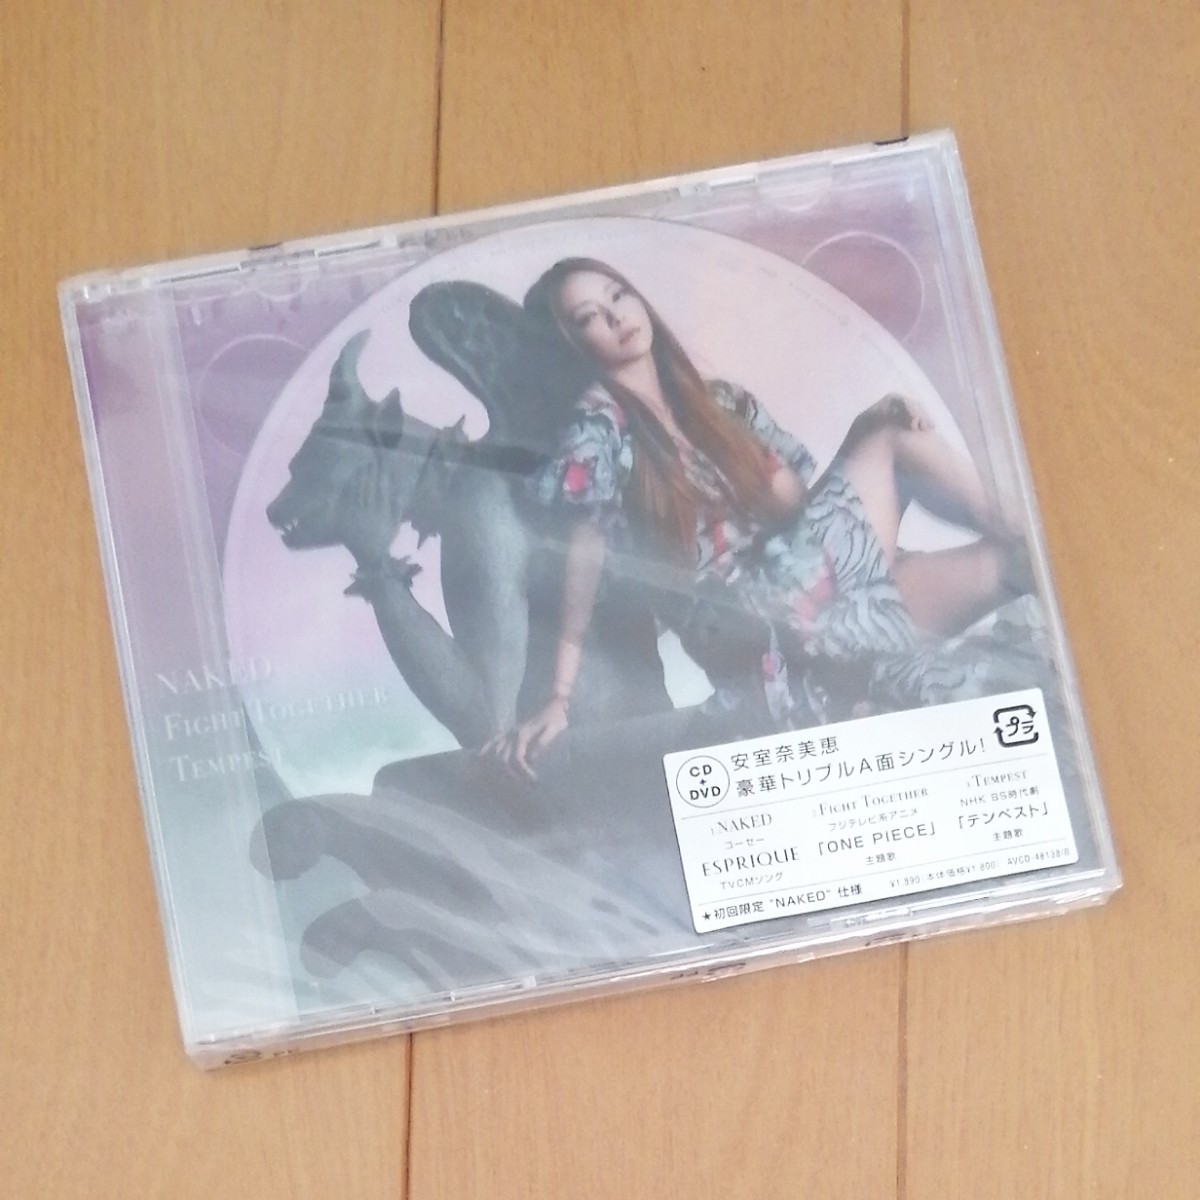 Paypayフリマ 安室奈美恵 Cd Dvd Naked Fight Together Tempest